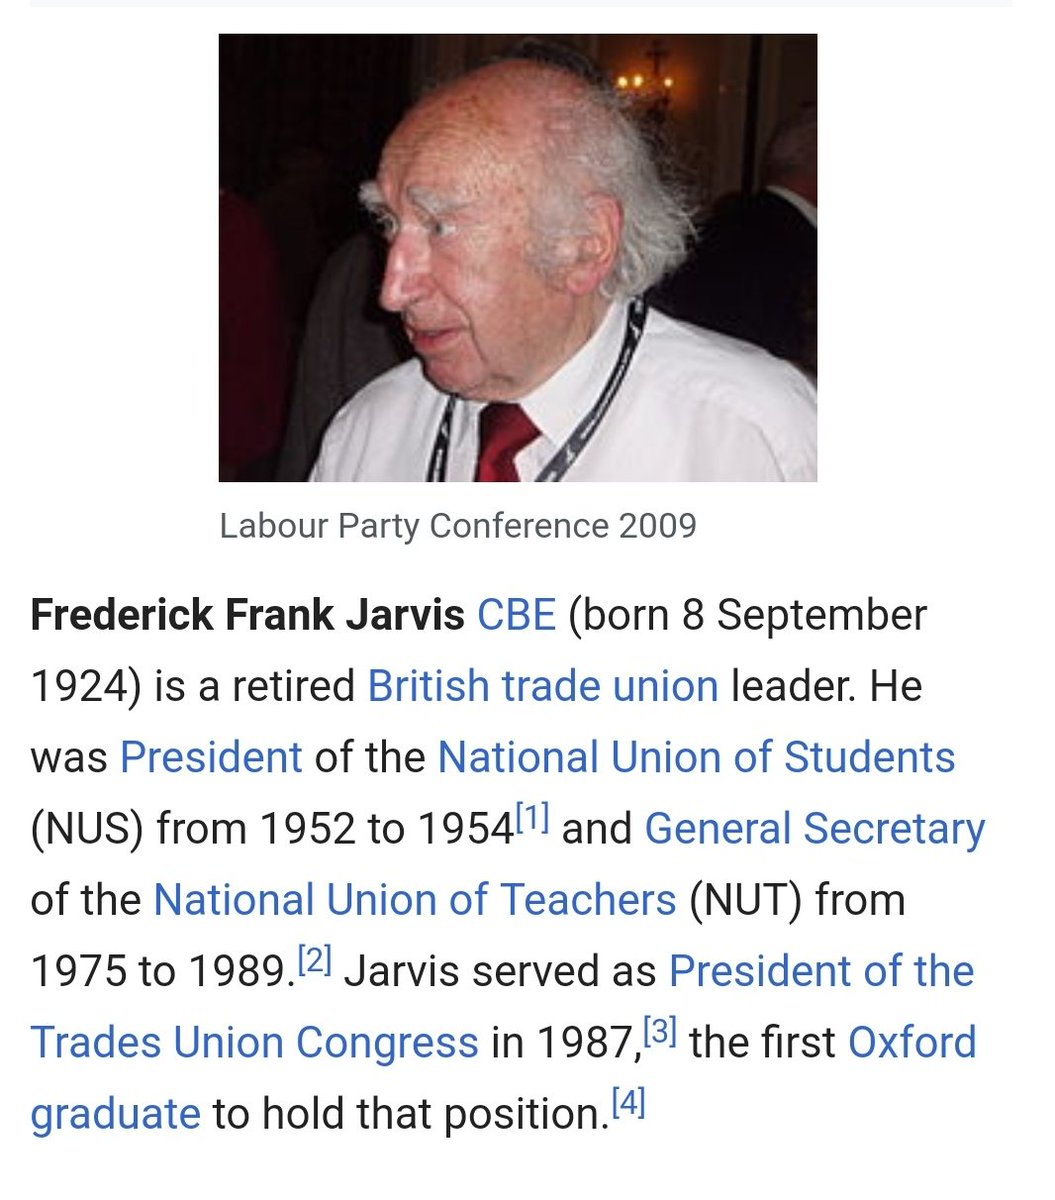 Again, directorships expose interesting links: Brighouse was on the board of The Academy of Youth at the same time as the trade union leader Frank Jarvis. Jarvis, in turn, was appointed director of the National Student Bureau on the same day as one William van Straubenzee ...